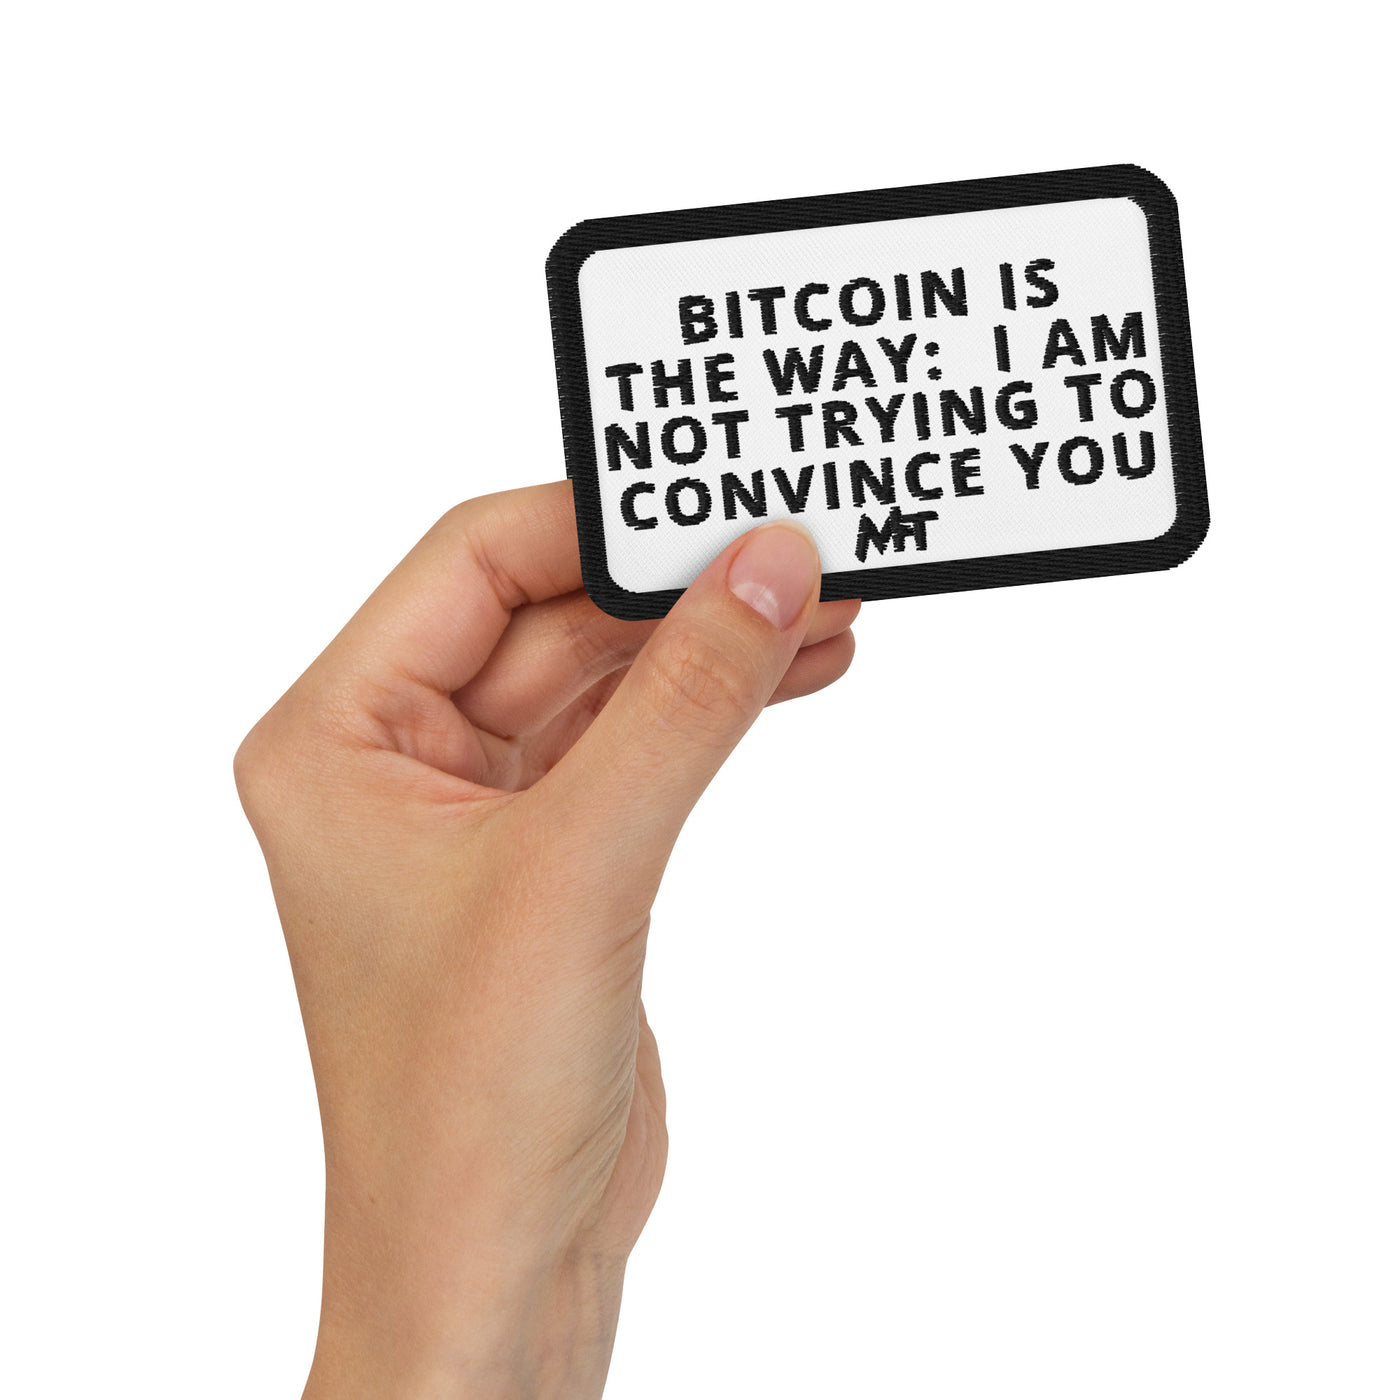 Bitcoin is the Way - Embroidered patches